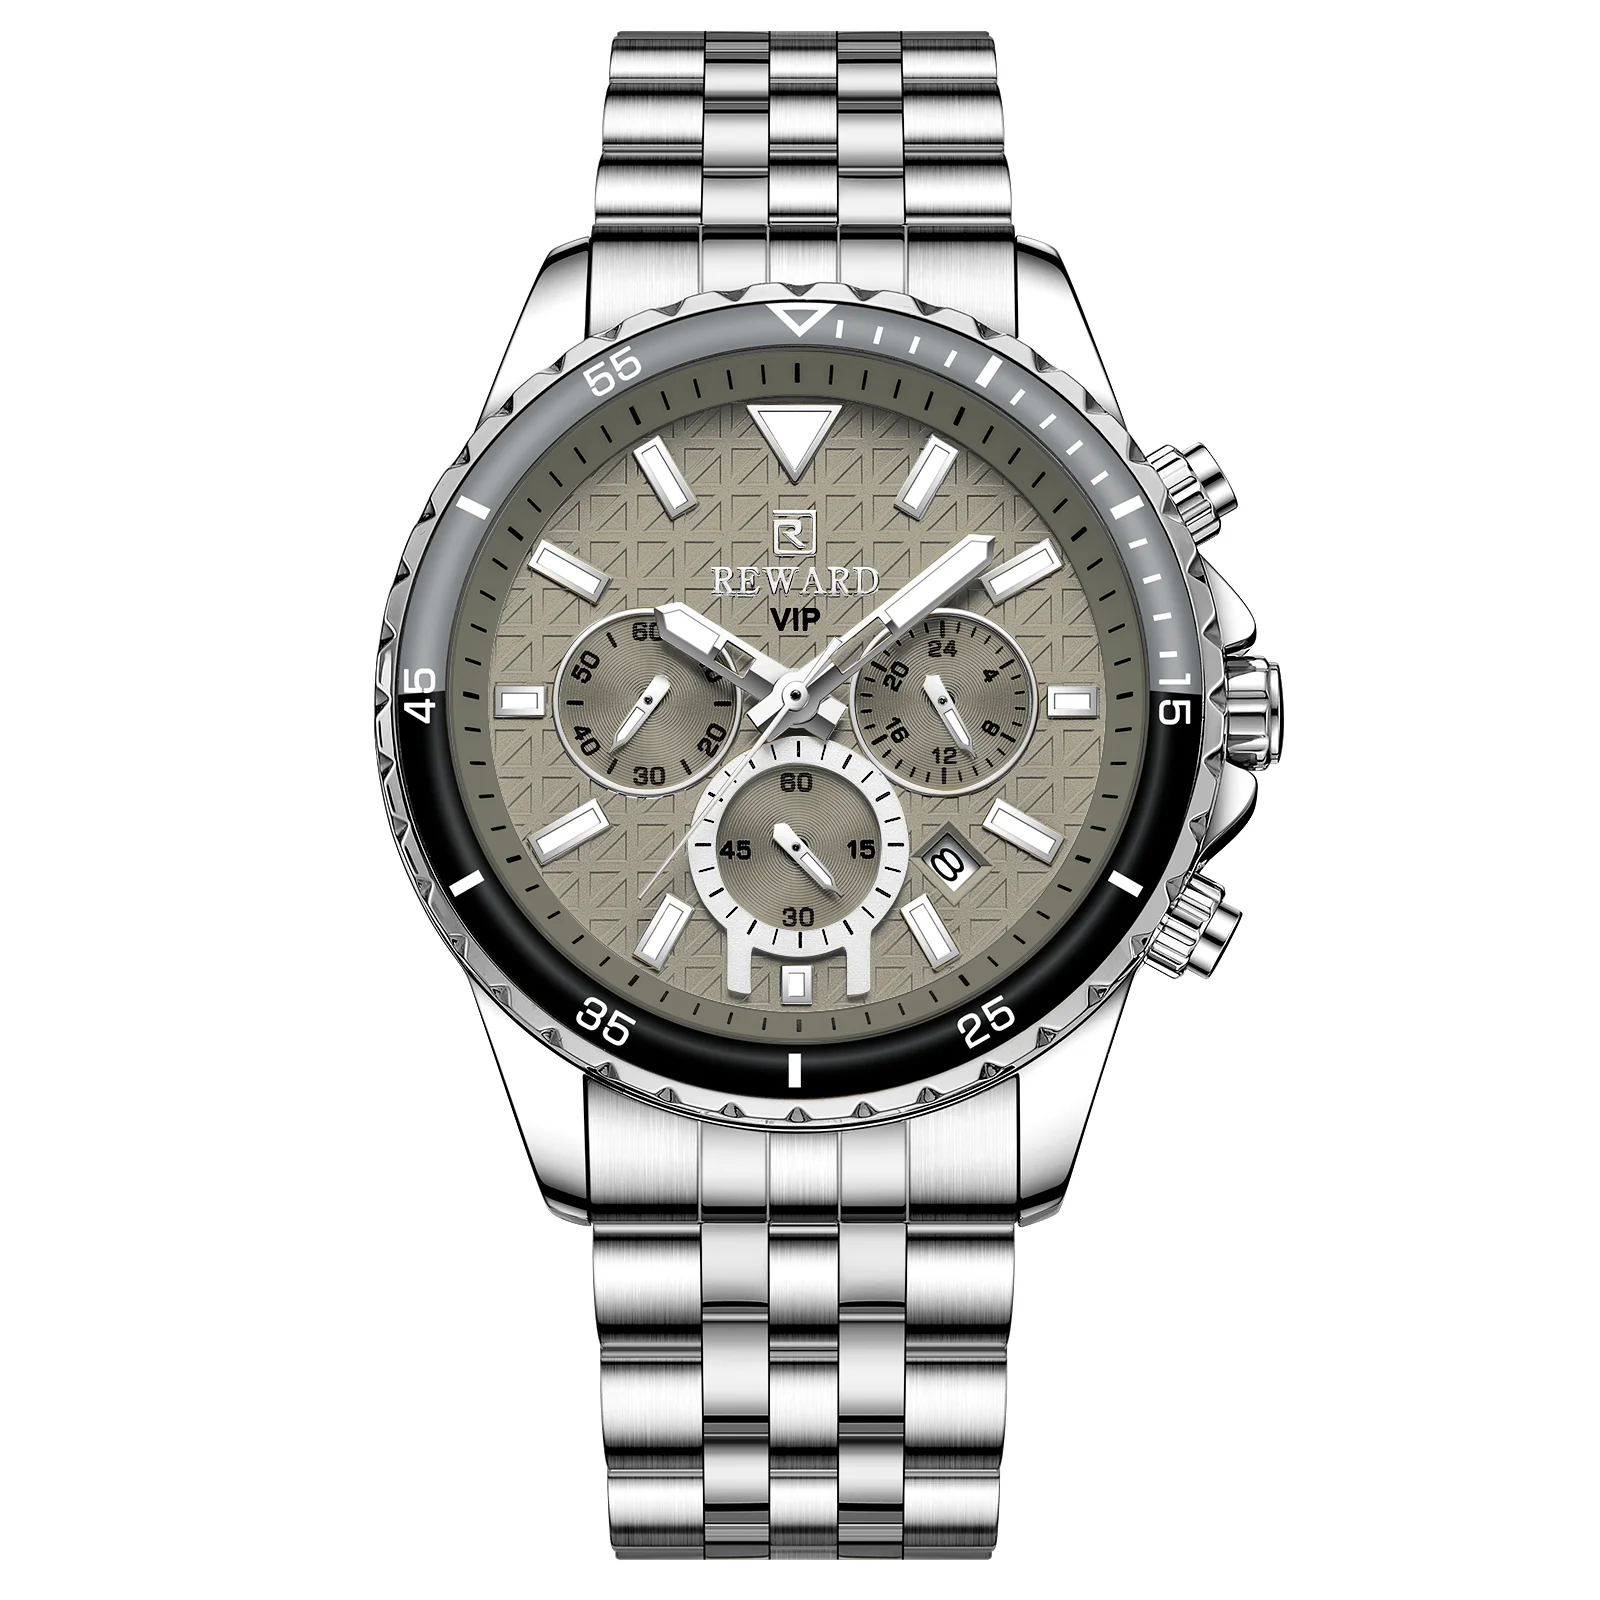 Reward Watch Suppliers  your best partner and offers you the best price RD81101M